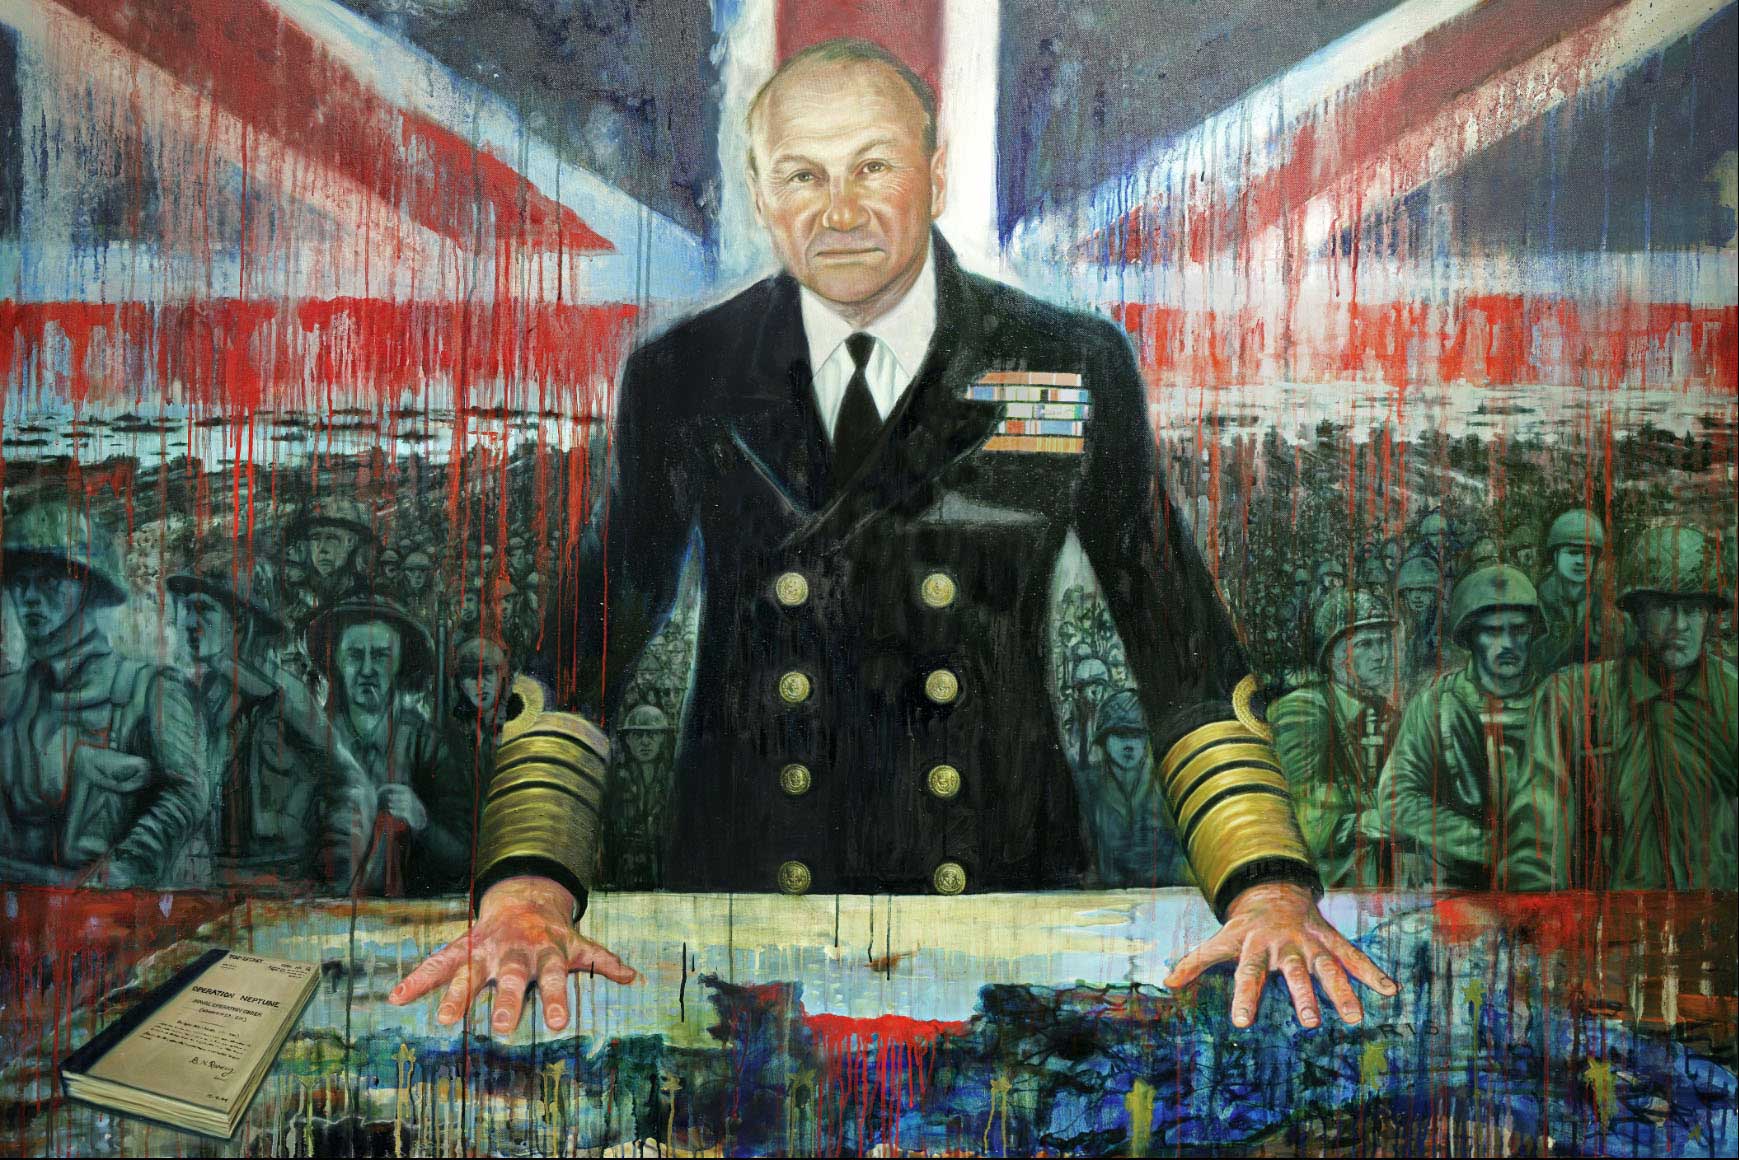 Admiral Ramsey. Oil on Canvas, 150x 120cm. Commissioned by Portsmouth City Council, D-Day 75th Commemorations 2019. Now in the Royal Navy Collections.